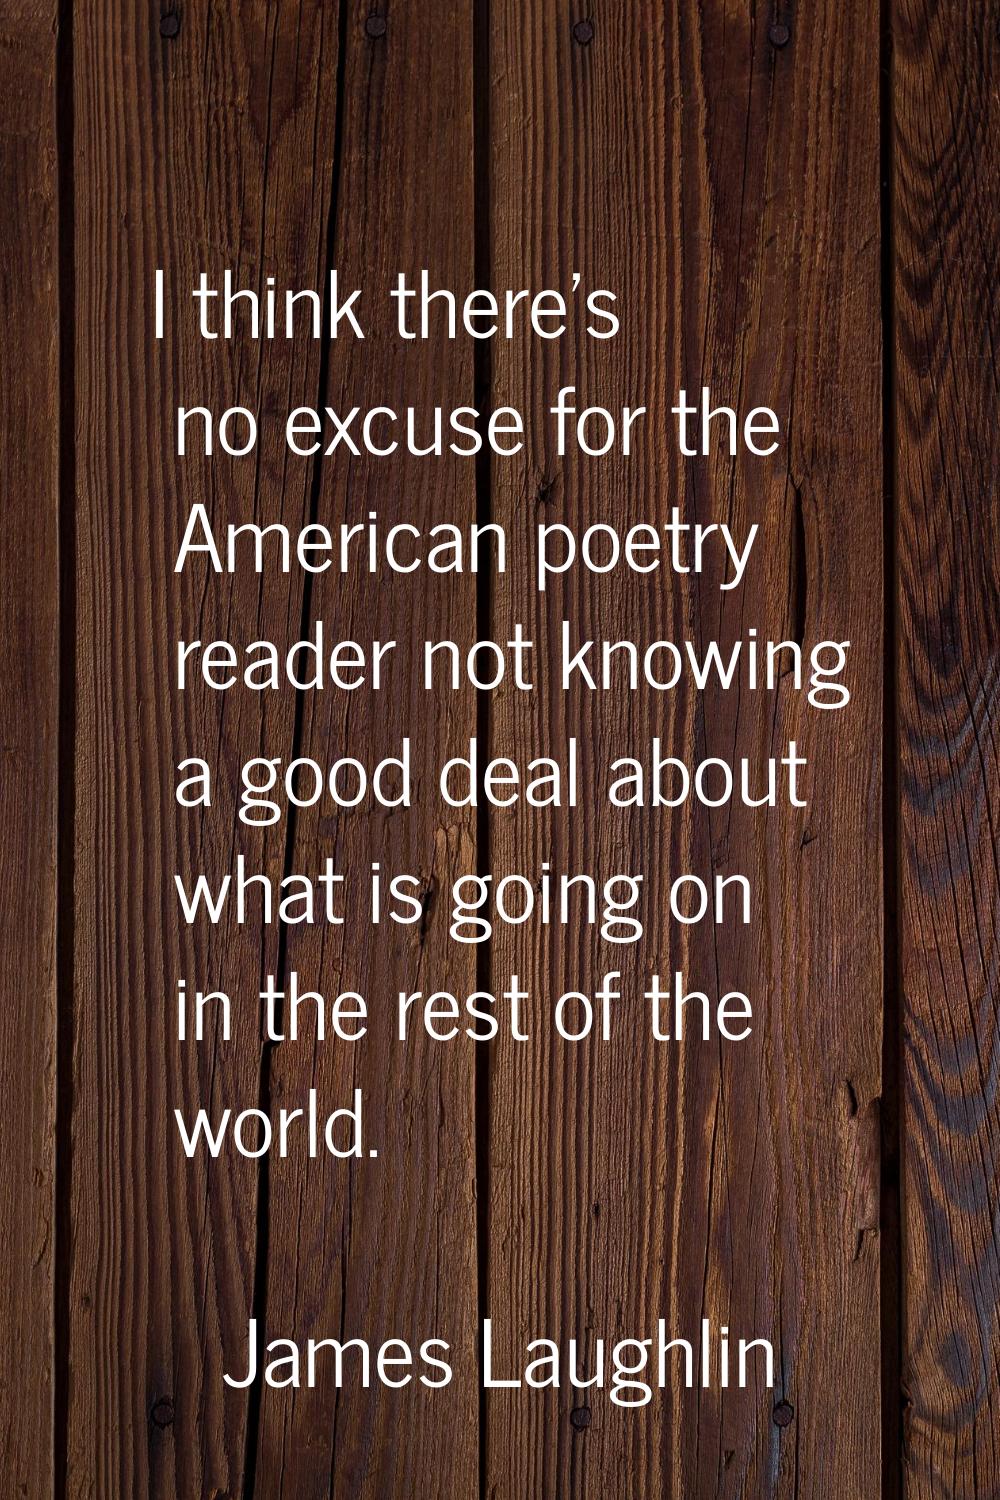 I think there's no excuse for the American poetry reader not knowing a good deal about what is goin